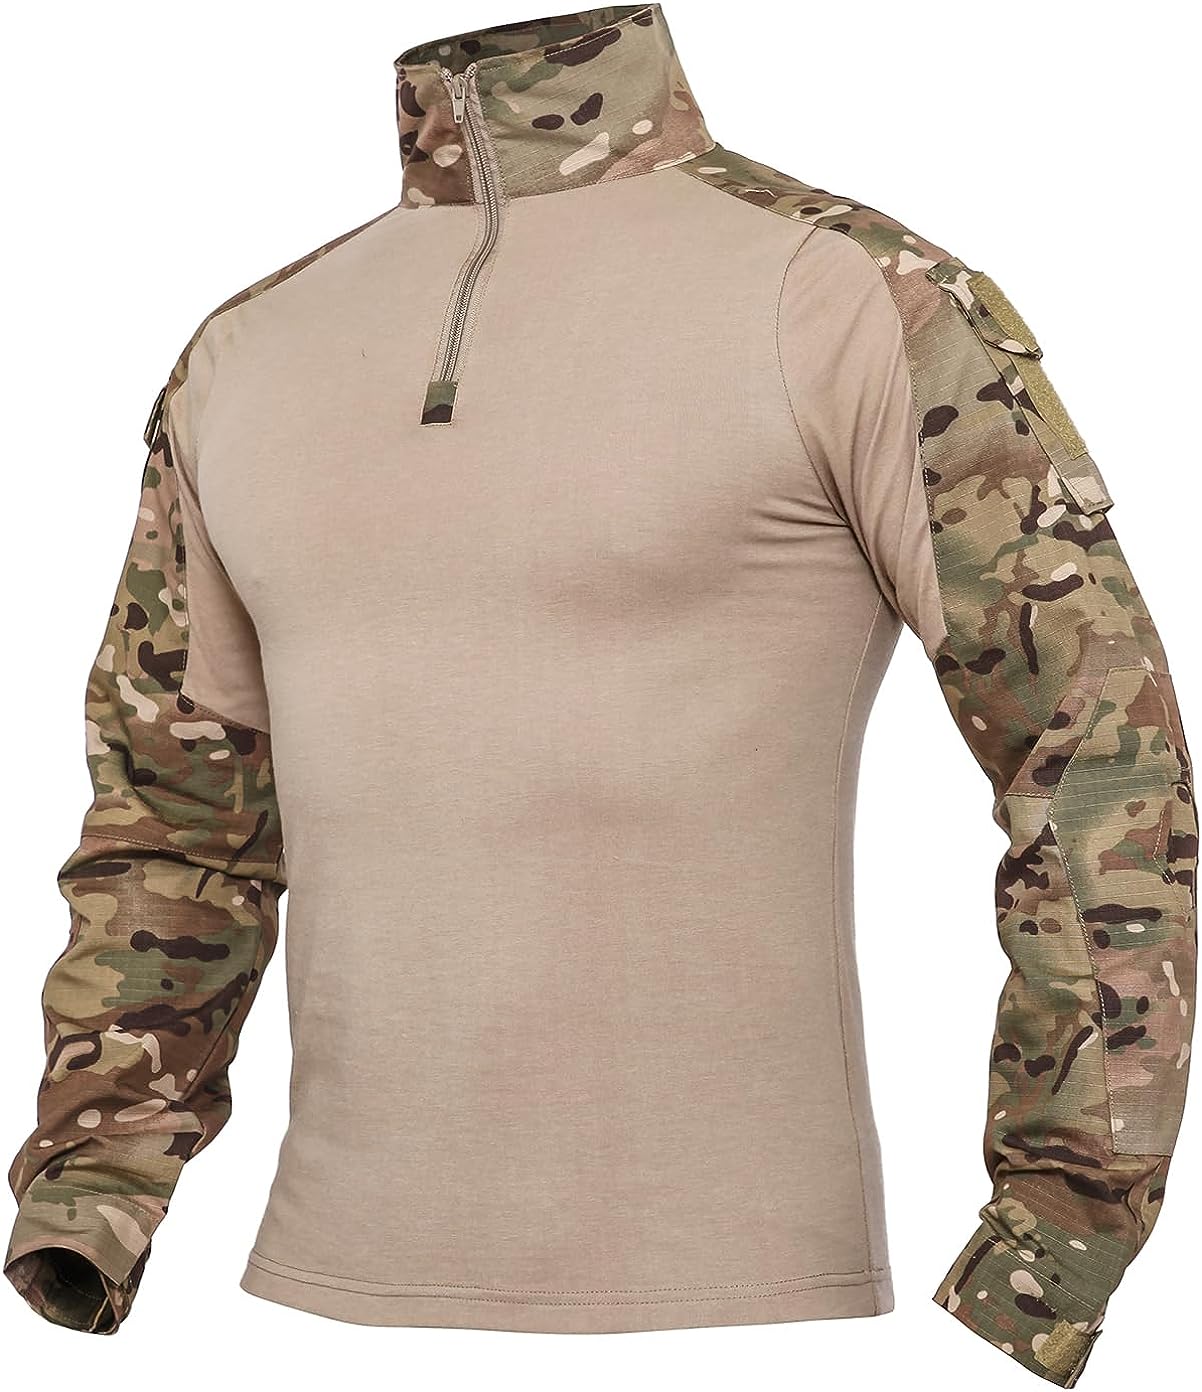 Moosehill G3 Combat Tactical Shirt for Men with 2-4 Pockets Airsoft-Military-Paintball-Camping Gear Multicam Army BDU TOP